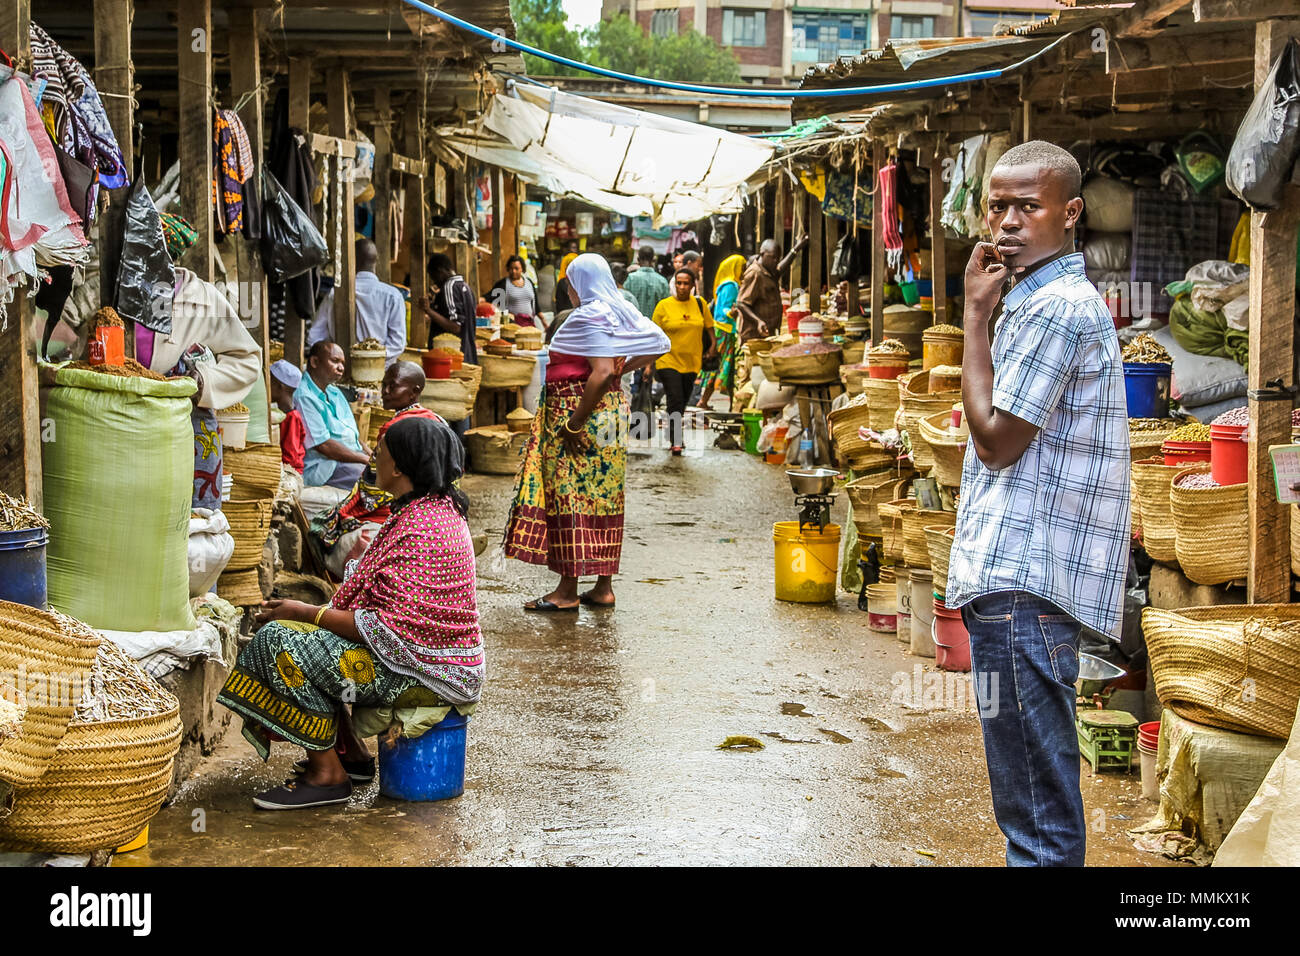 Arusha, Tanzania, Africa - January 2, 2013: Teenager on the road within  market of the town Stock Photo